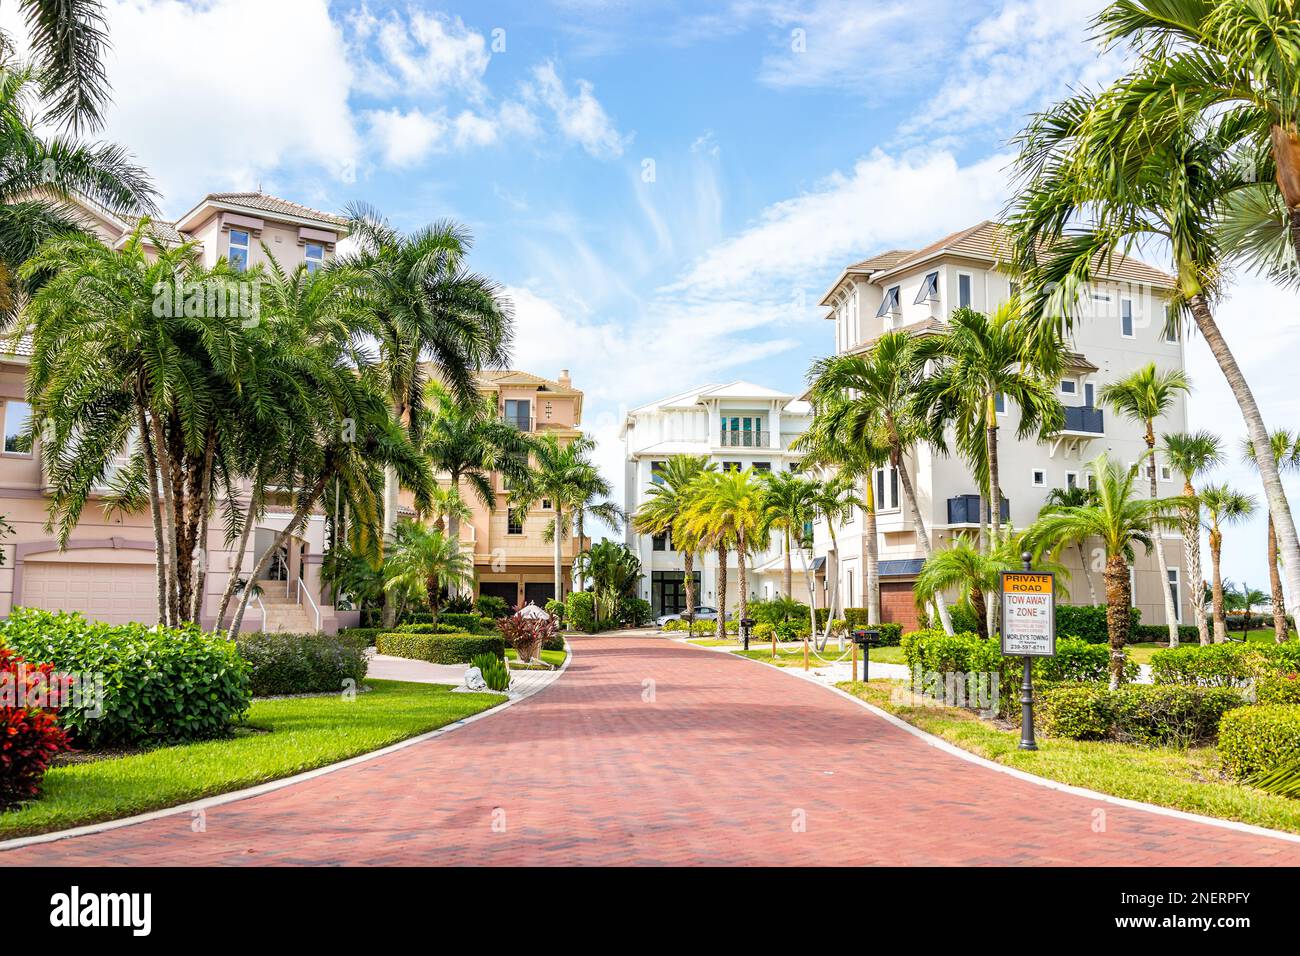 Bonita Springs, USA - November 2, 2021: Barefoot beach boulevard road residential community in Florida with luxury houses real estate property homes i Stock Photo